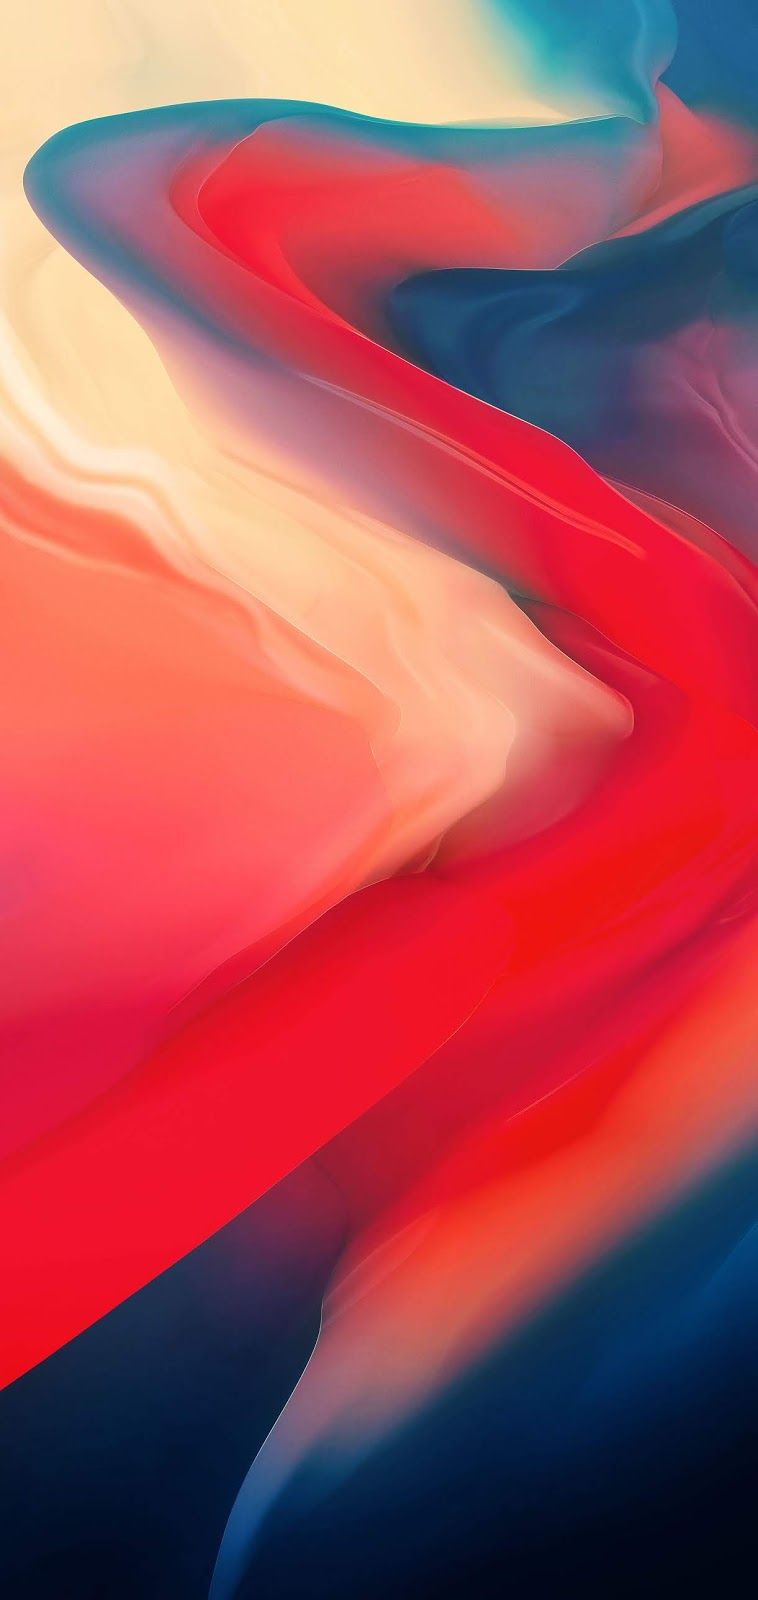 OnePlus 6 Red Edition Stock Wallpaper 4K. Apple wallpaper, Oneplus wallpaper